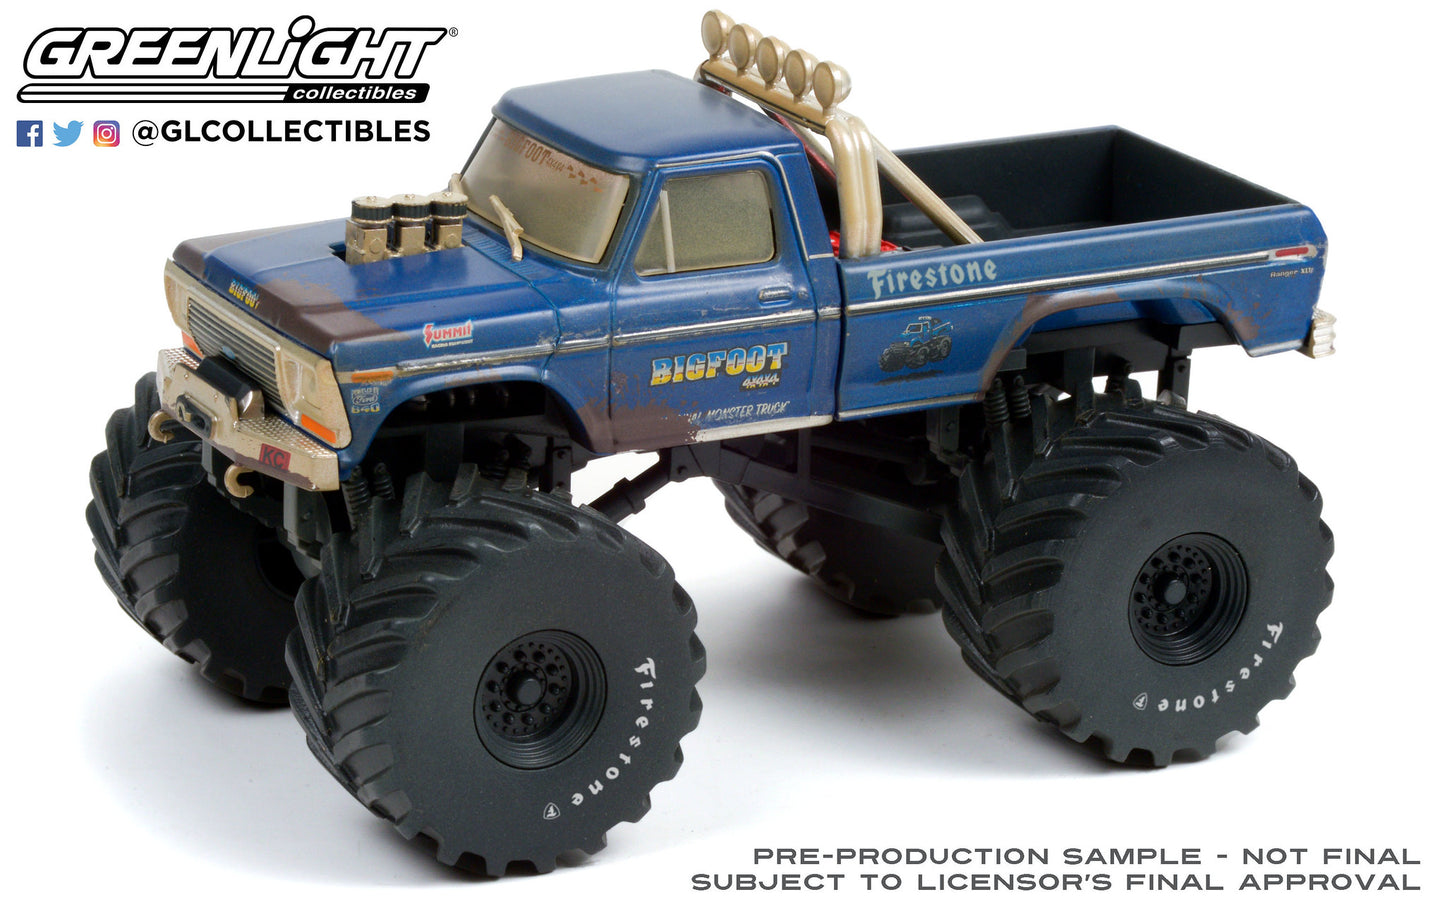 1:43 Kings of Crunch - Bigfoot #1 The Original Monster Truck (1979) - 1974 Ford F-250 Monster Truck (with 66-Inch Tires) (Dirty Version)